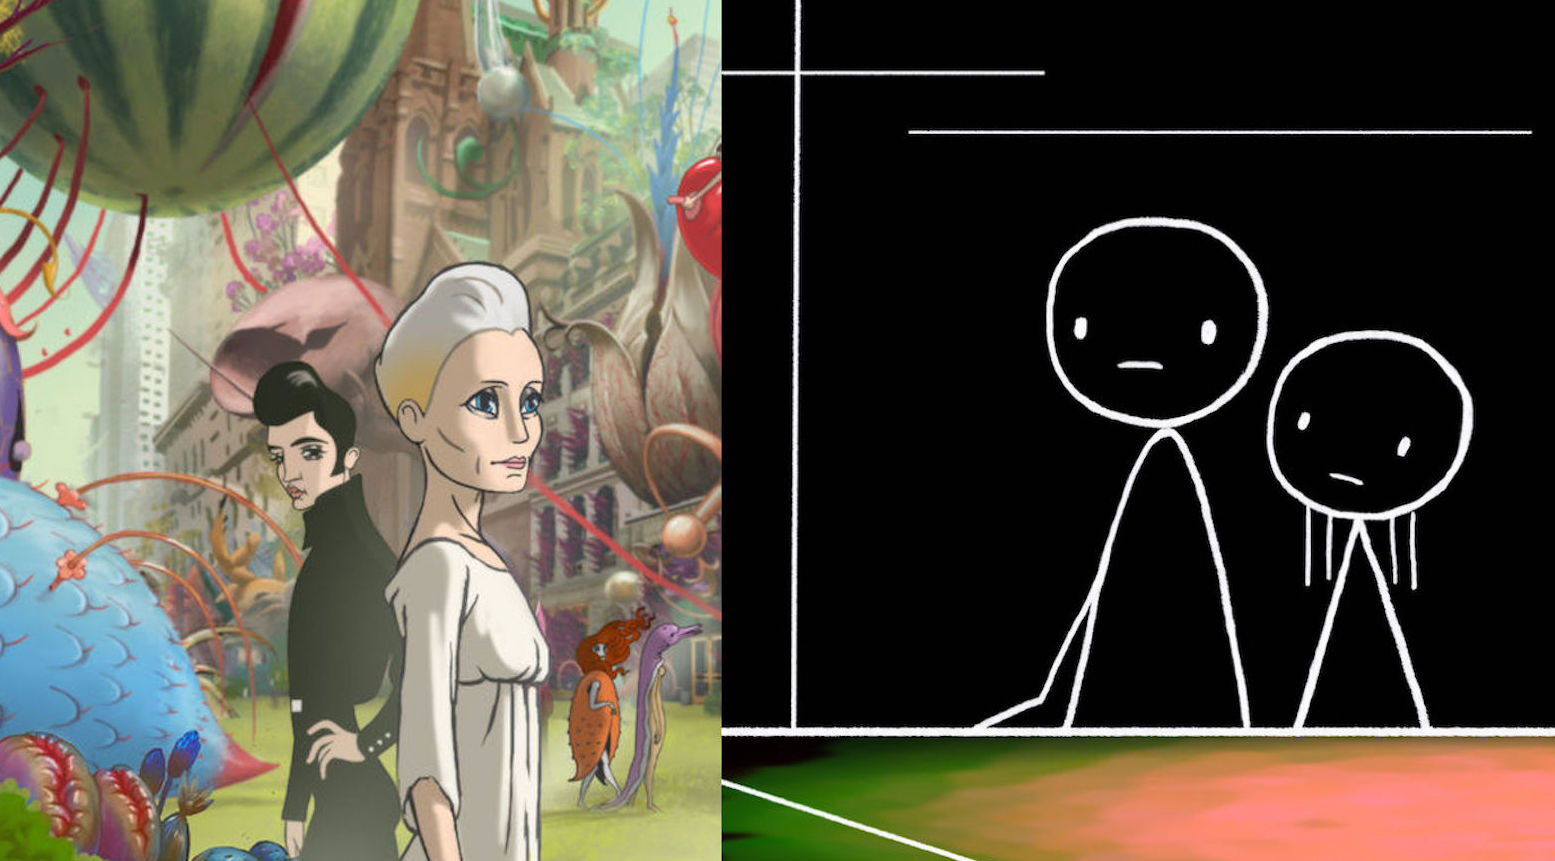 Images from animated films, on the left a white haired female character looks around at a fantastical green world; on the right, two sad stick figures in white stand against a blank black background